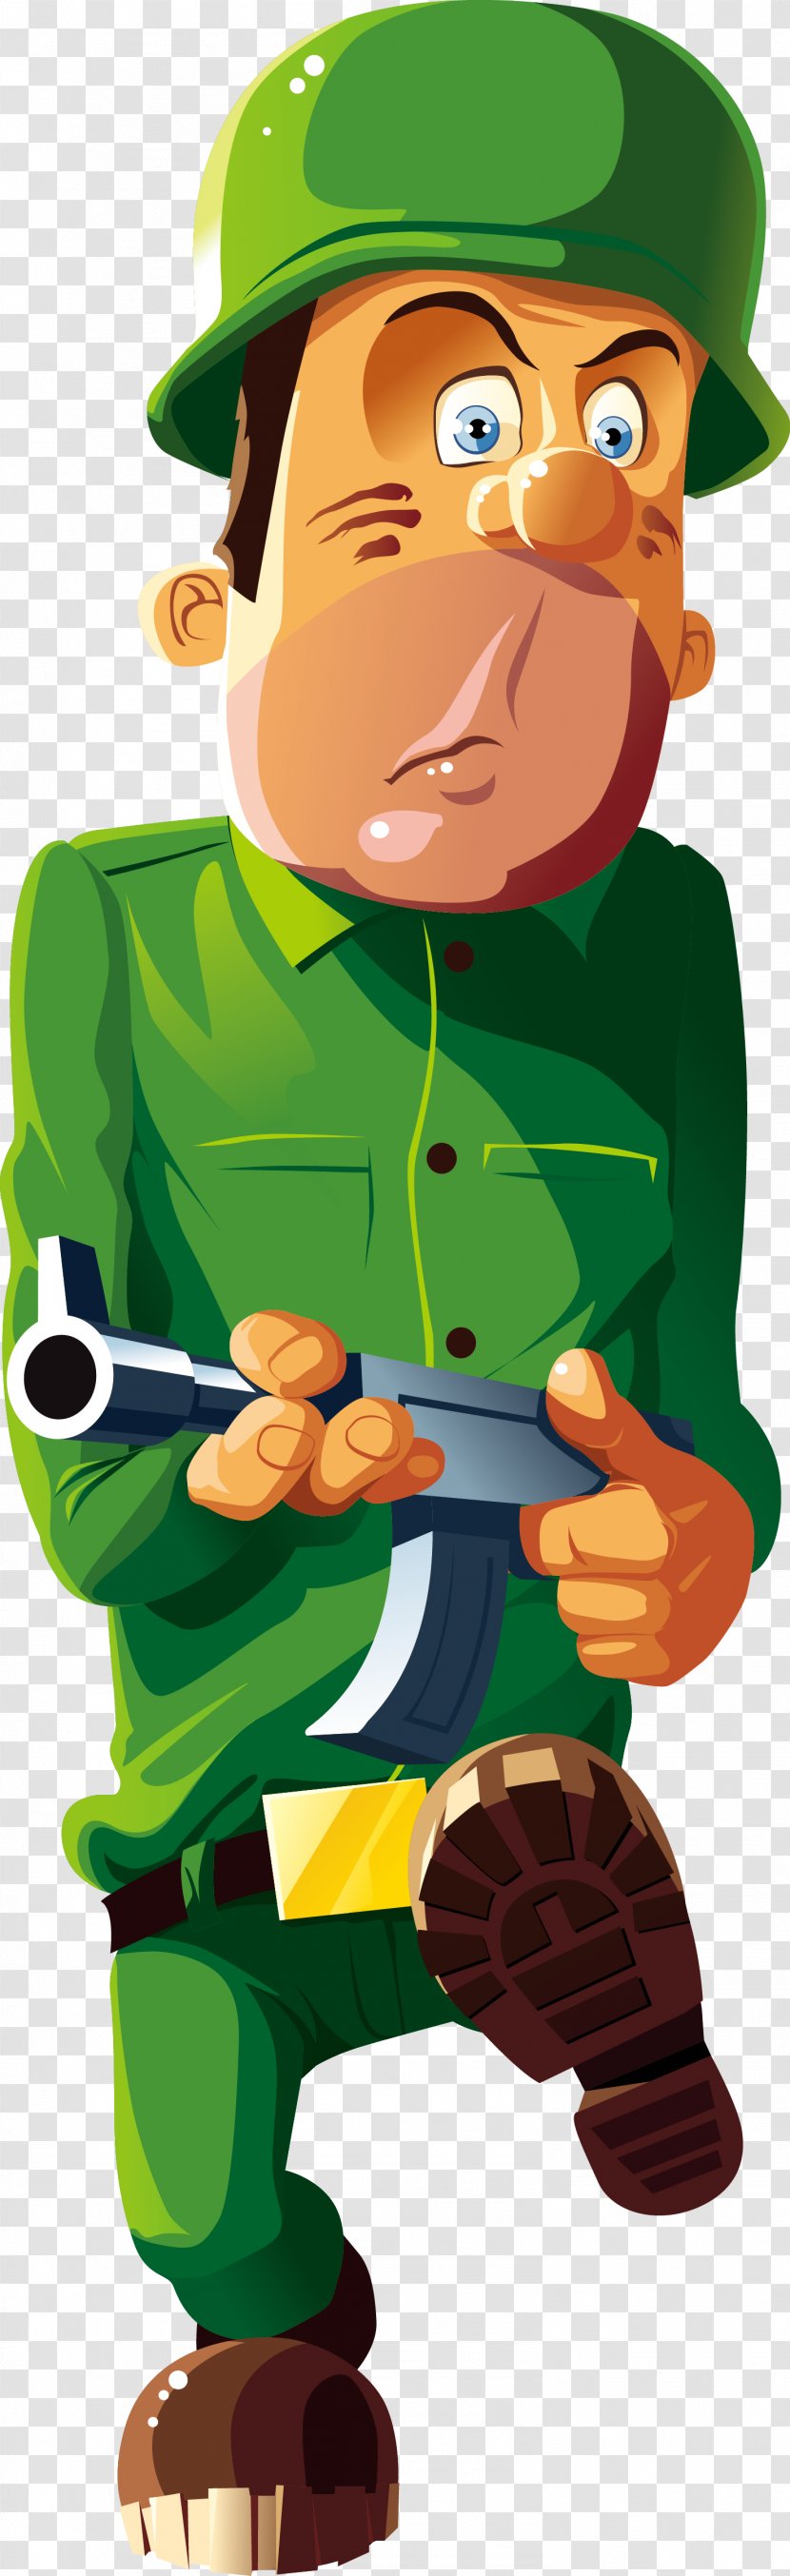 Soldier Cartoon Royalty-free Illustration - Marching - Q Version Warrior Figure Transparent PNG